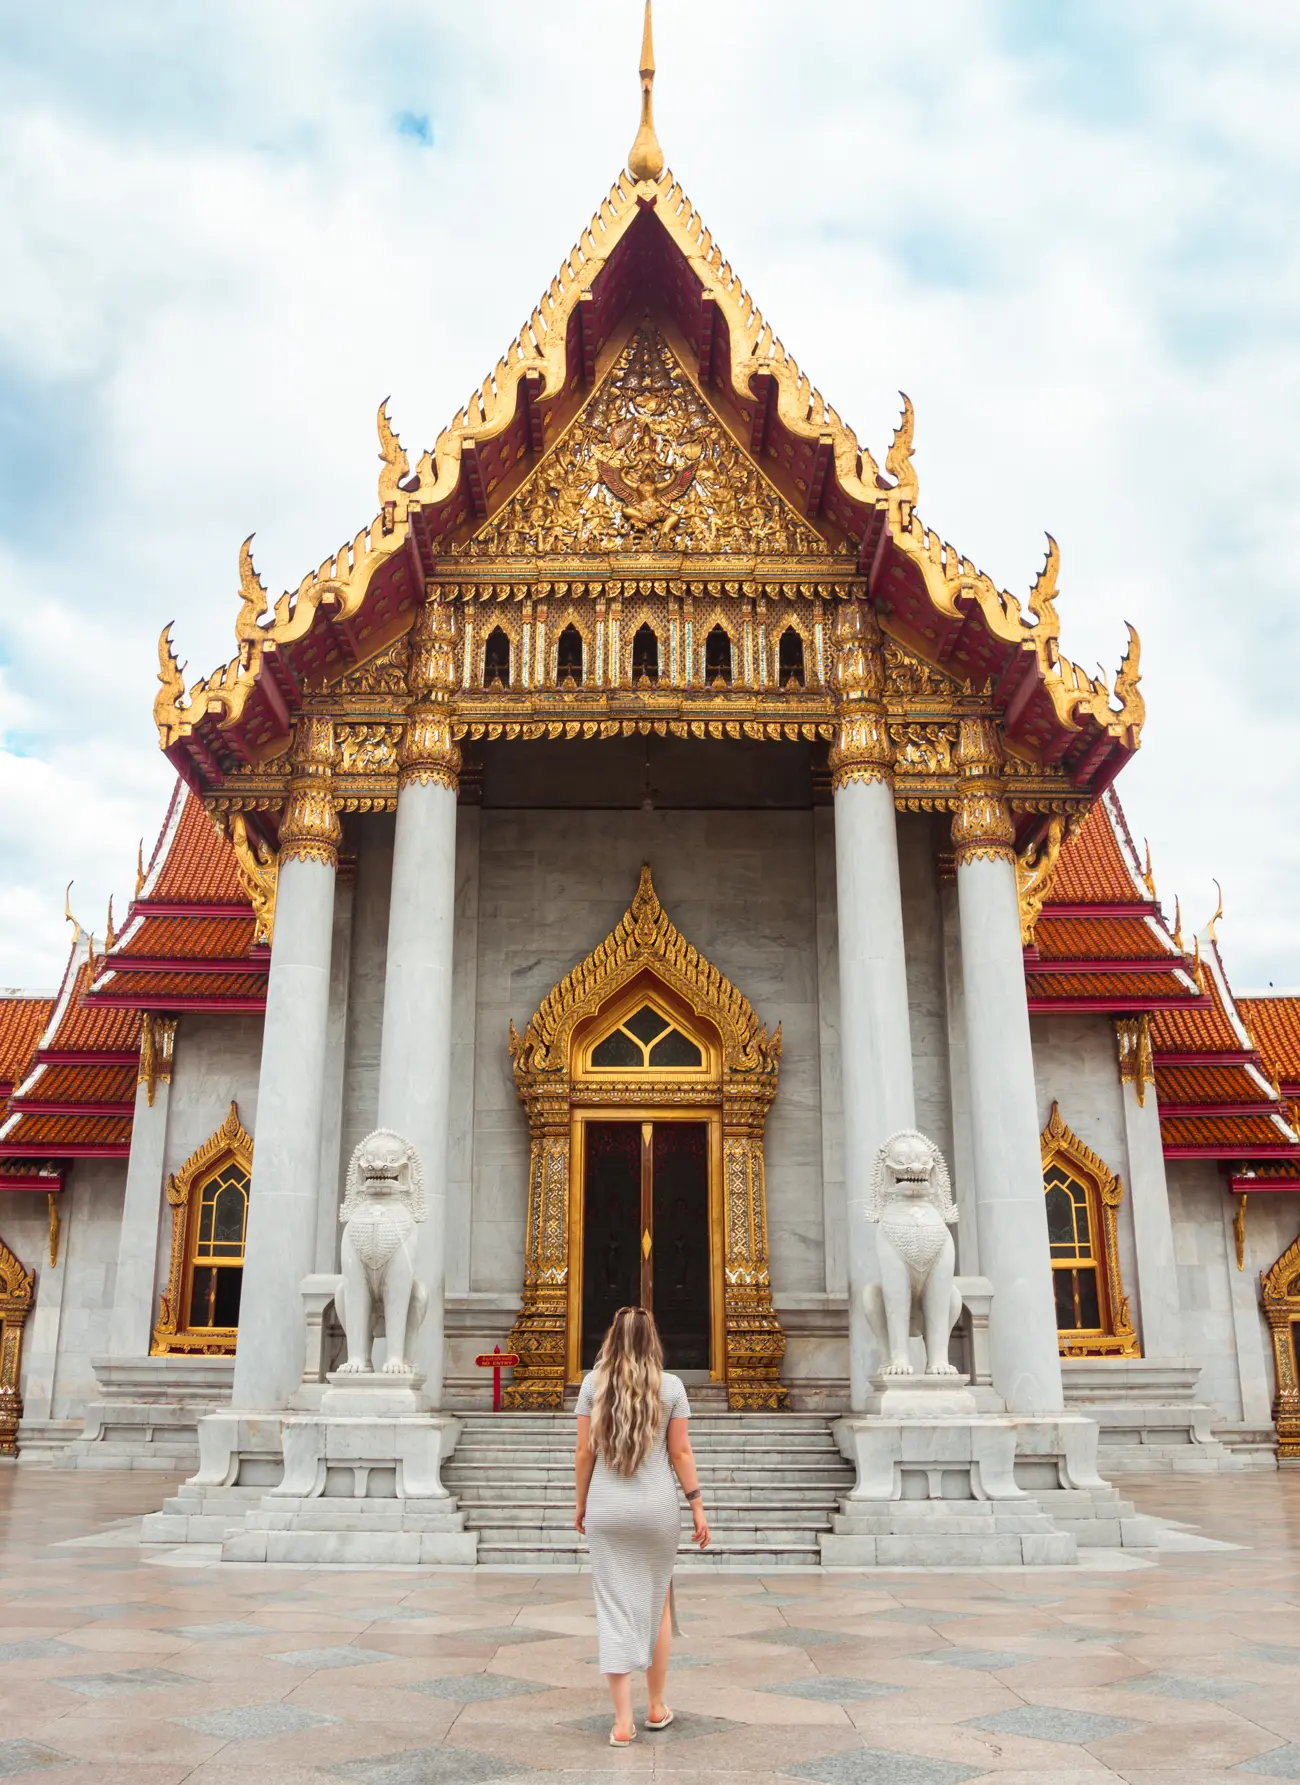 Girl with long hair wearing a maxi dress walking towards Wat Ben Marble temple with red roof and gold details in Bangkok - Indonesia vs Thailand.